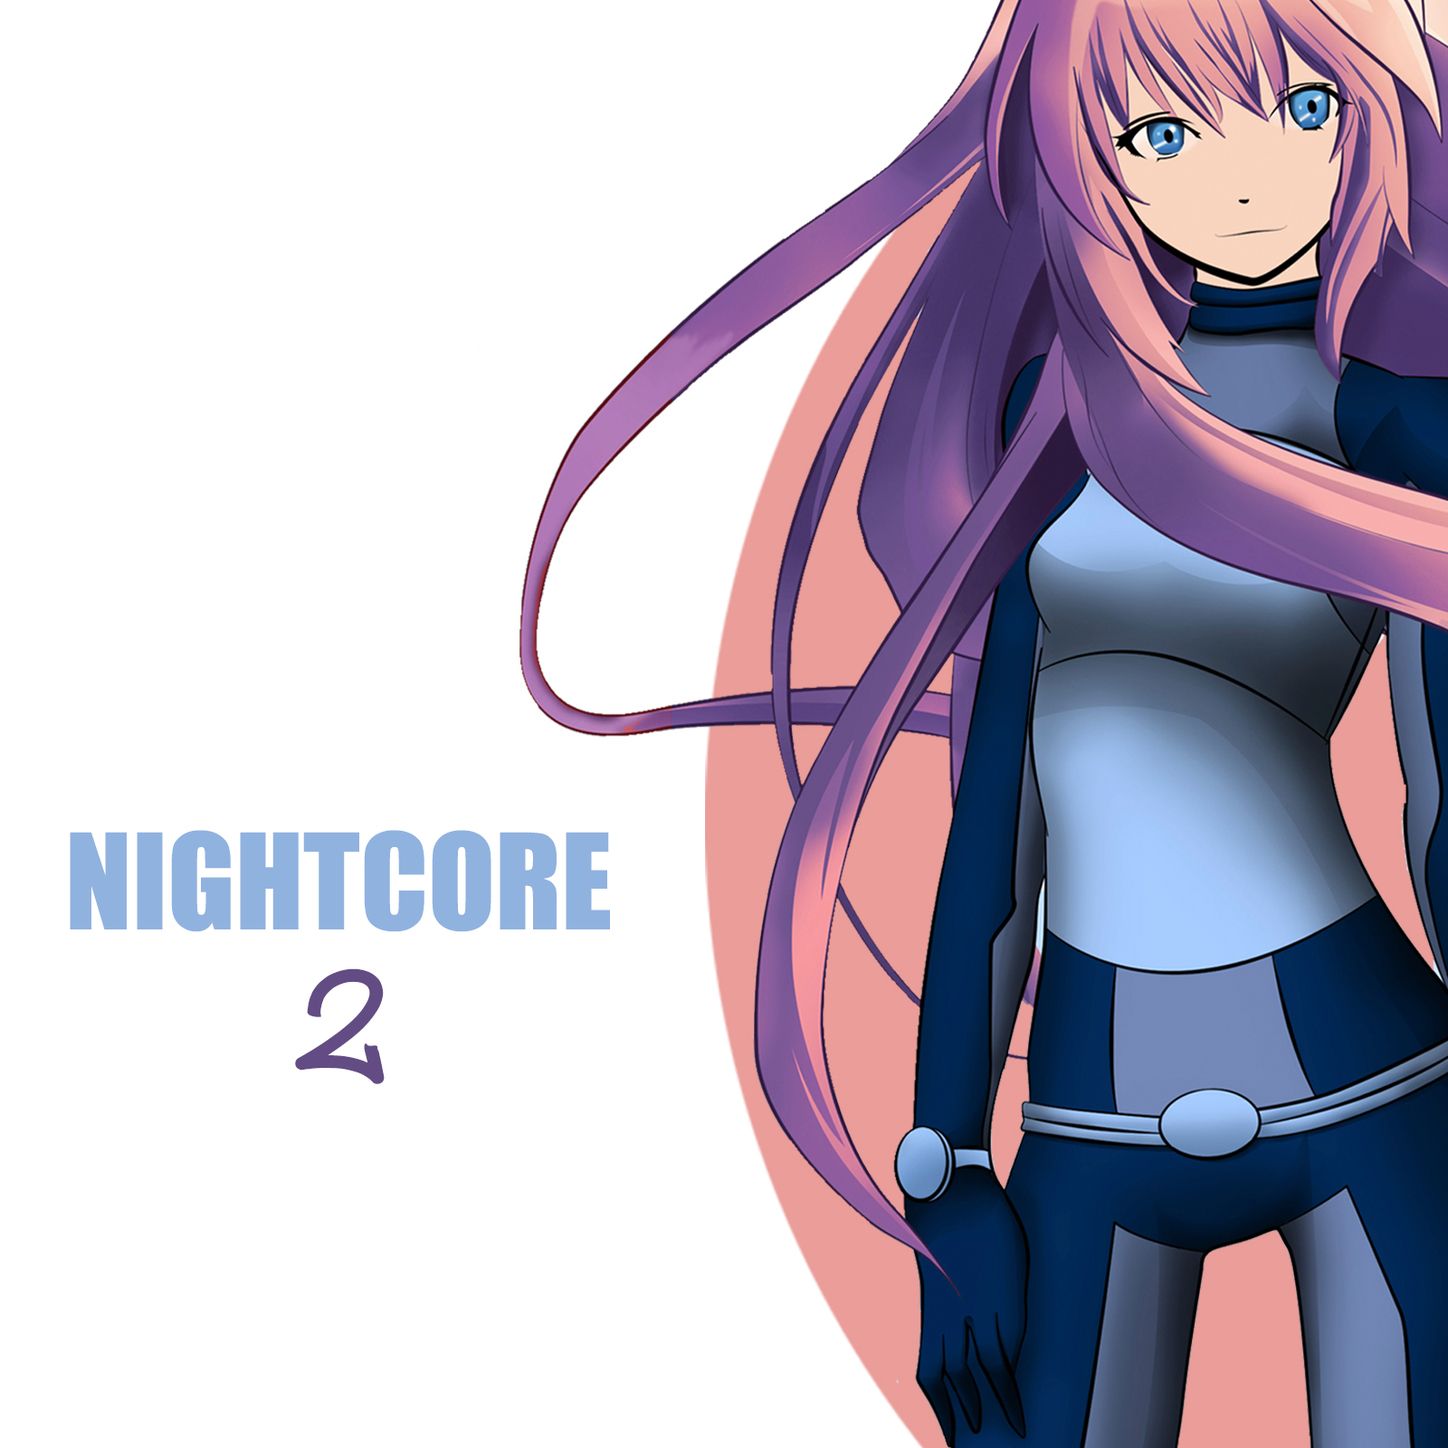 Counting Down the Days (Nightcore Edit)